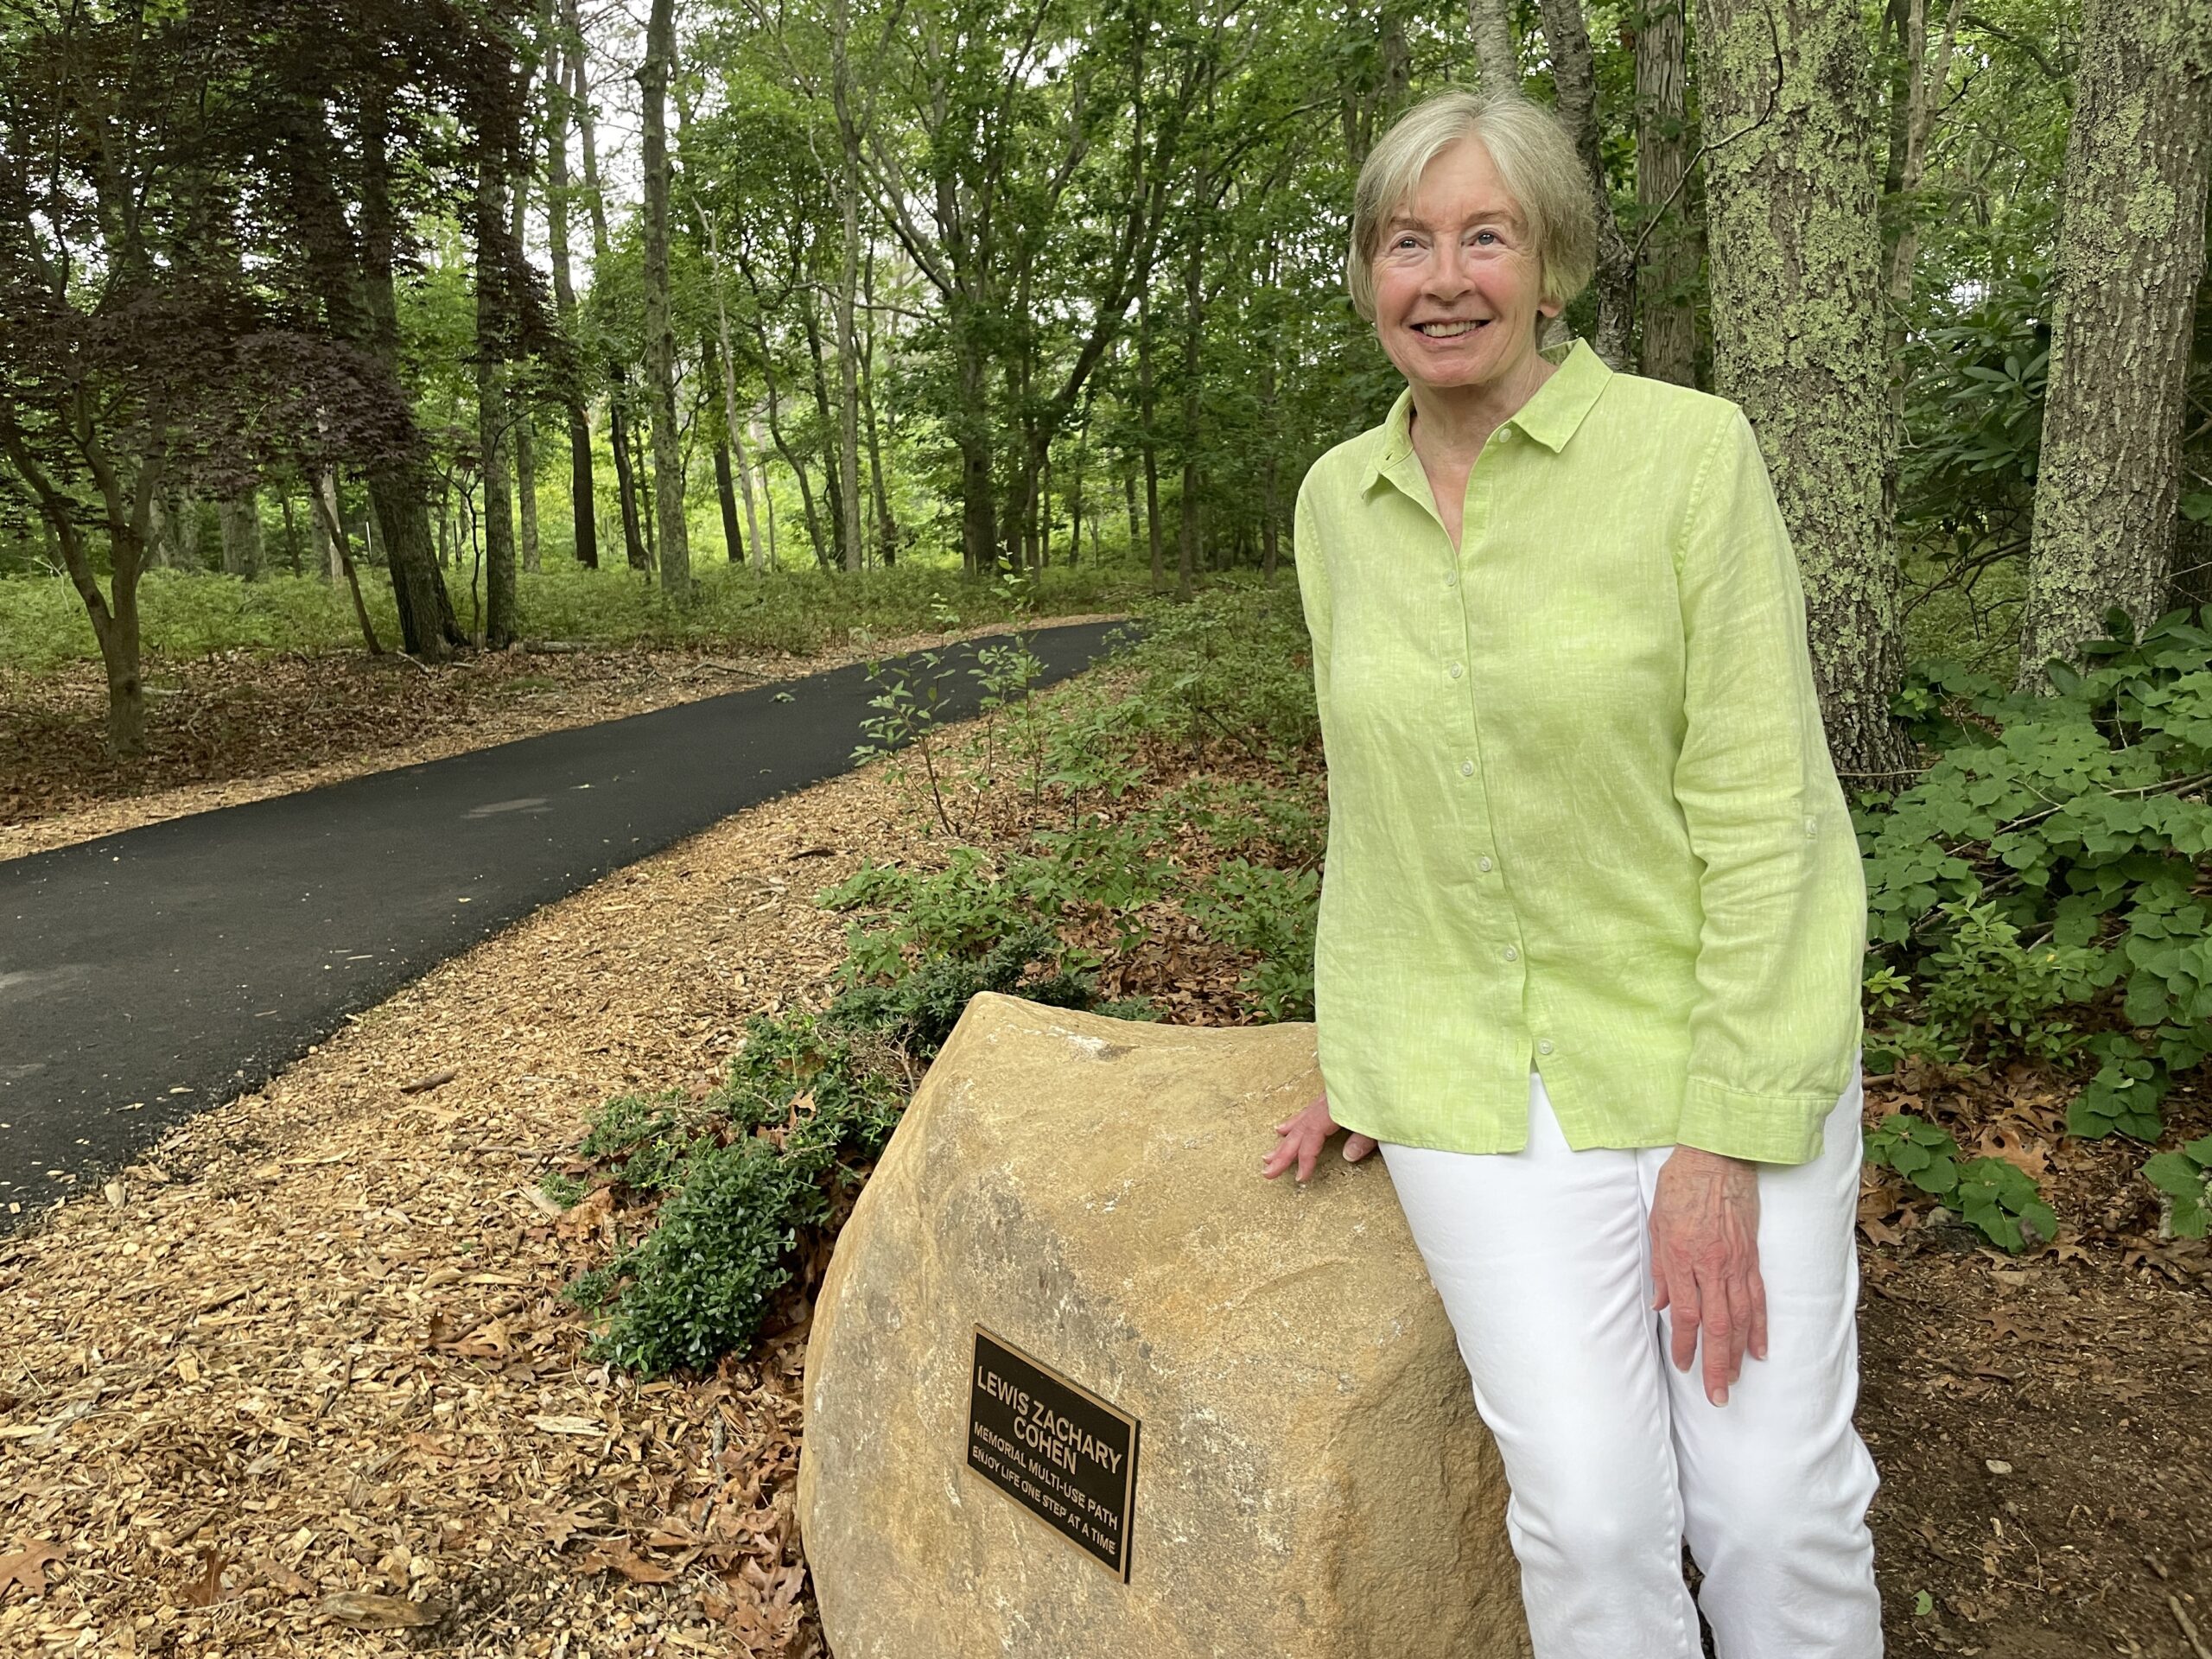 Pamela Cohen a the dedication of the new multi-use nature trail at the Buckskill Meadows Nature Preserve, which was dedicated on Monday in honor of her late husband, Zach Cohen, who had long advocated for a handcapped-accessible nature trail.